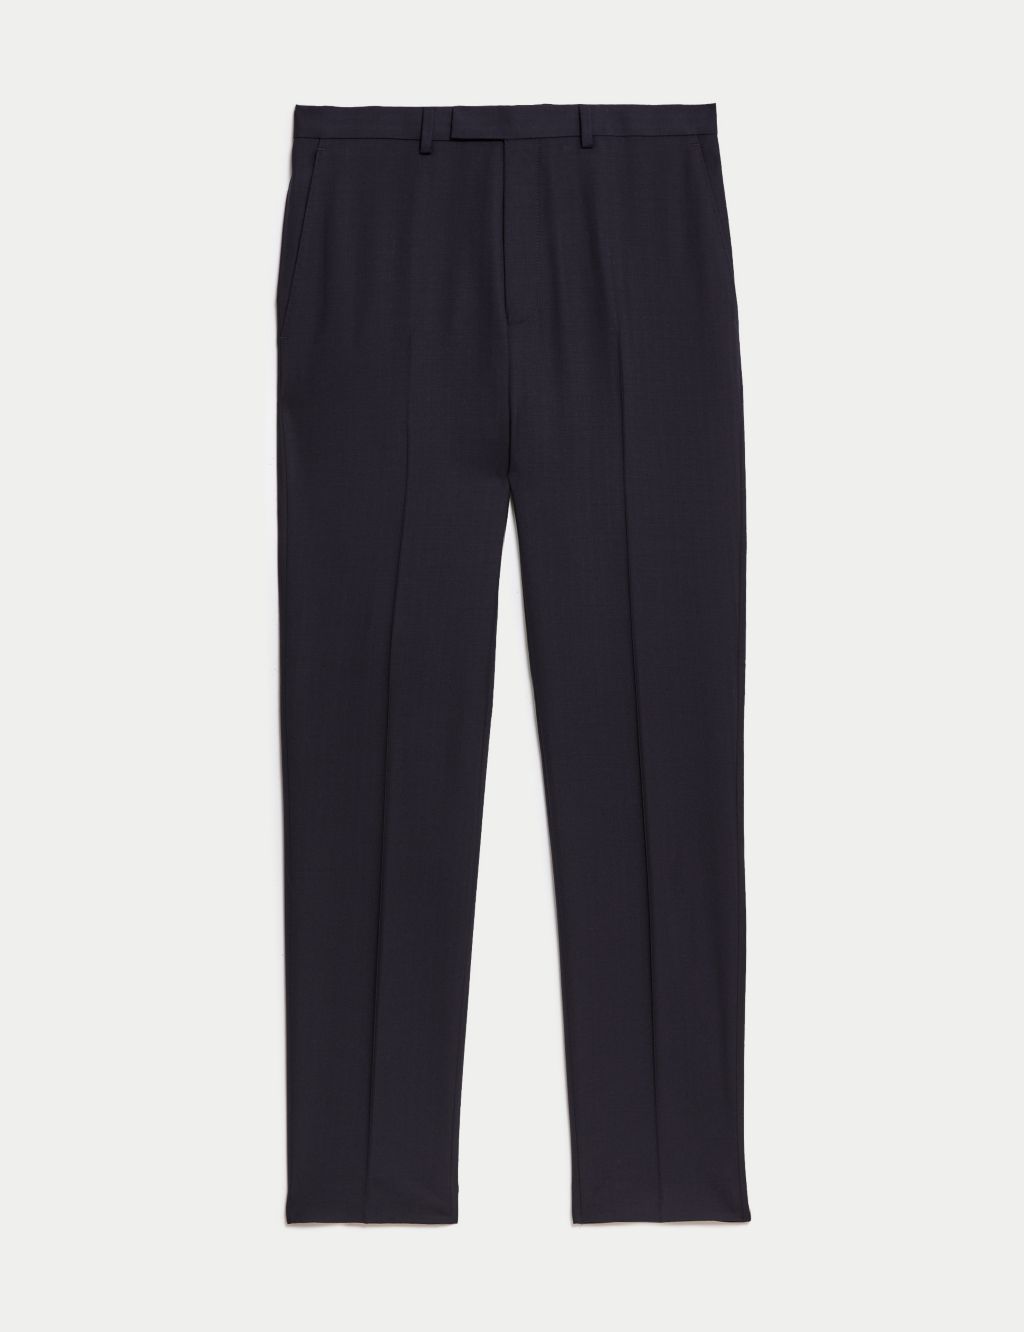 Regular Fit Pure Wool Suit Trousers image 1